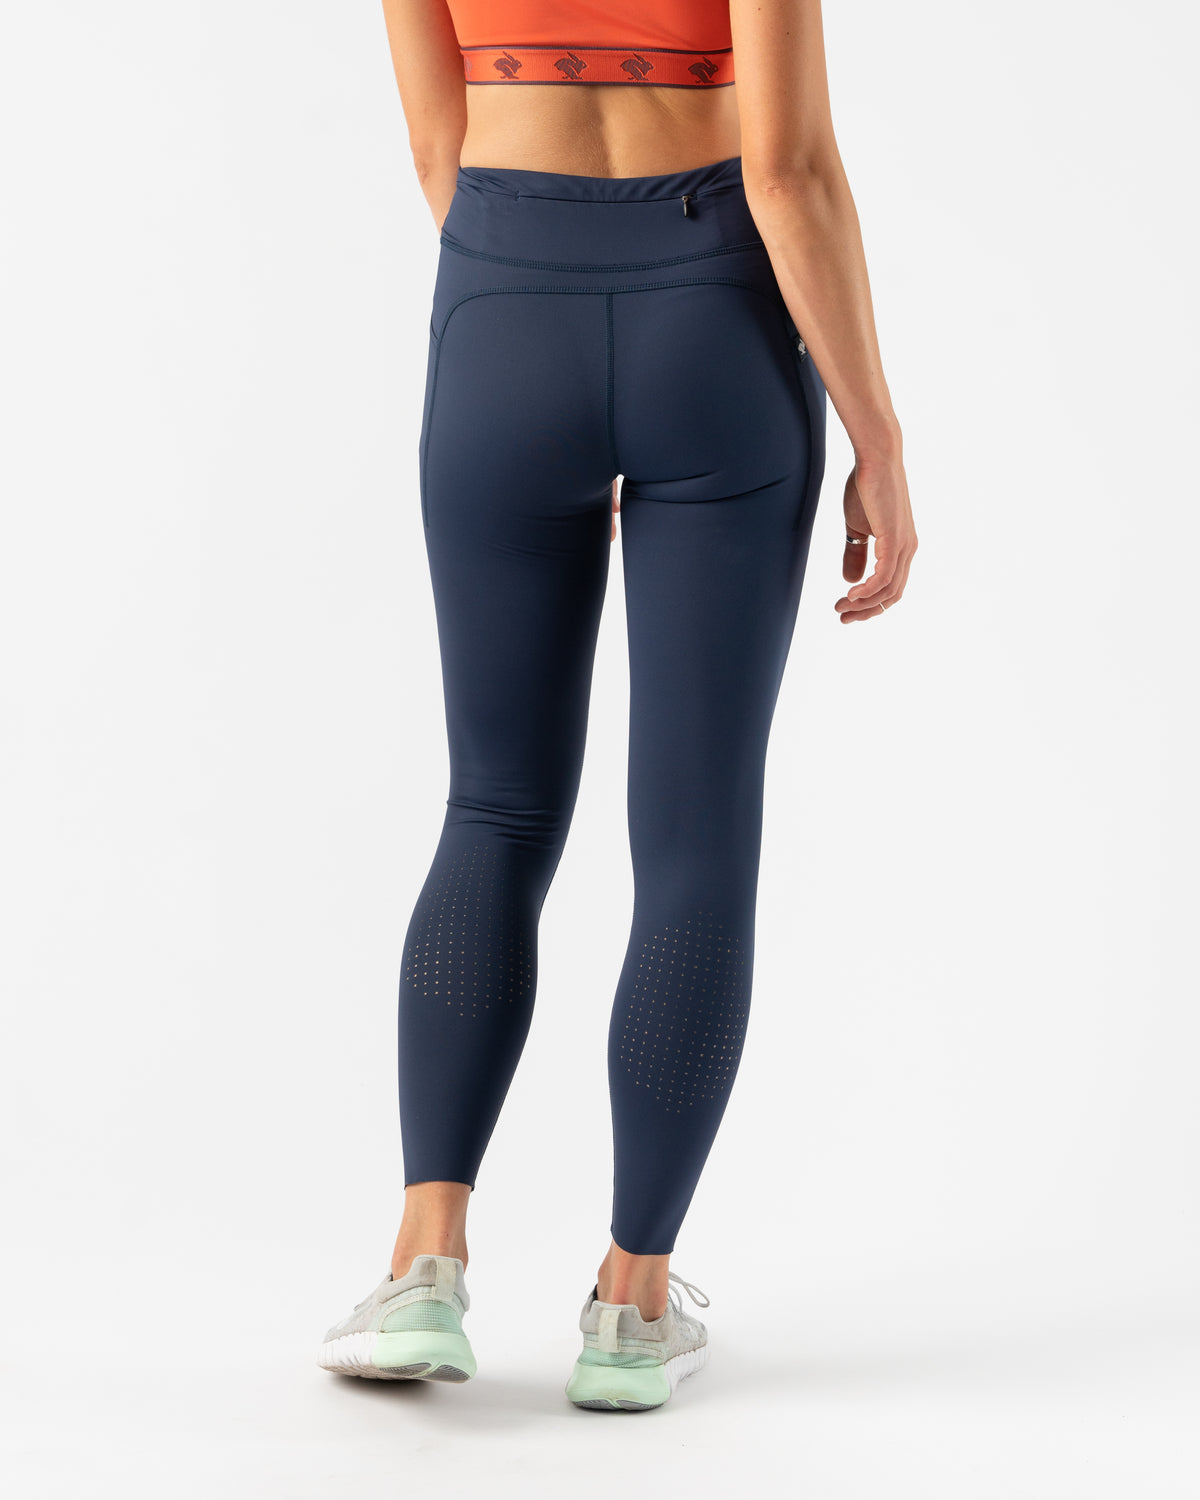 Adidas Cold.RDY Legging Women Compression Pants - Crew Navy Size